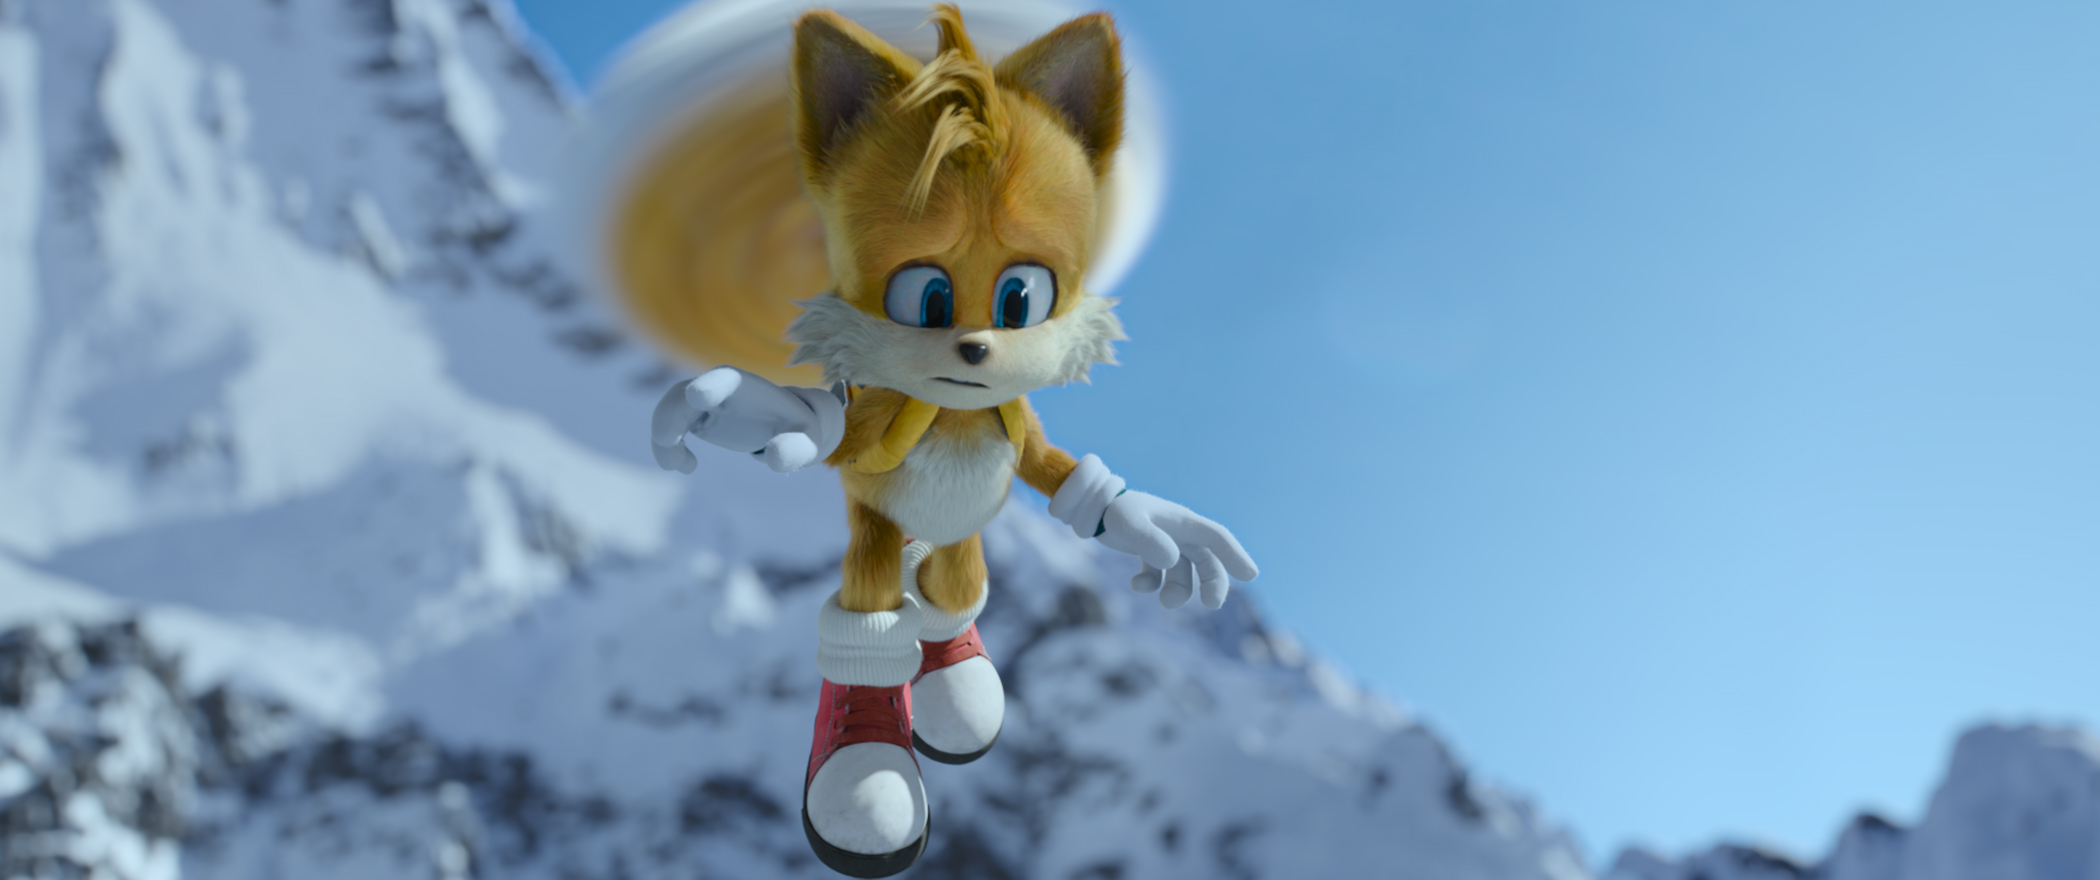 Tails (Colleen O'Shaughnessey) in SSonic the Hedgehog.